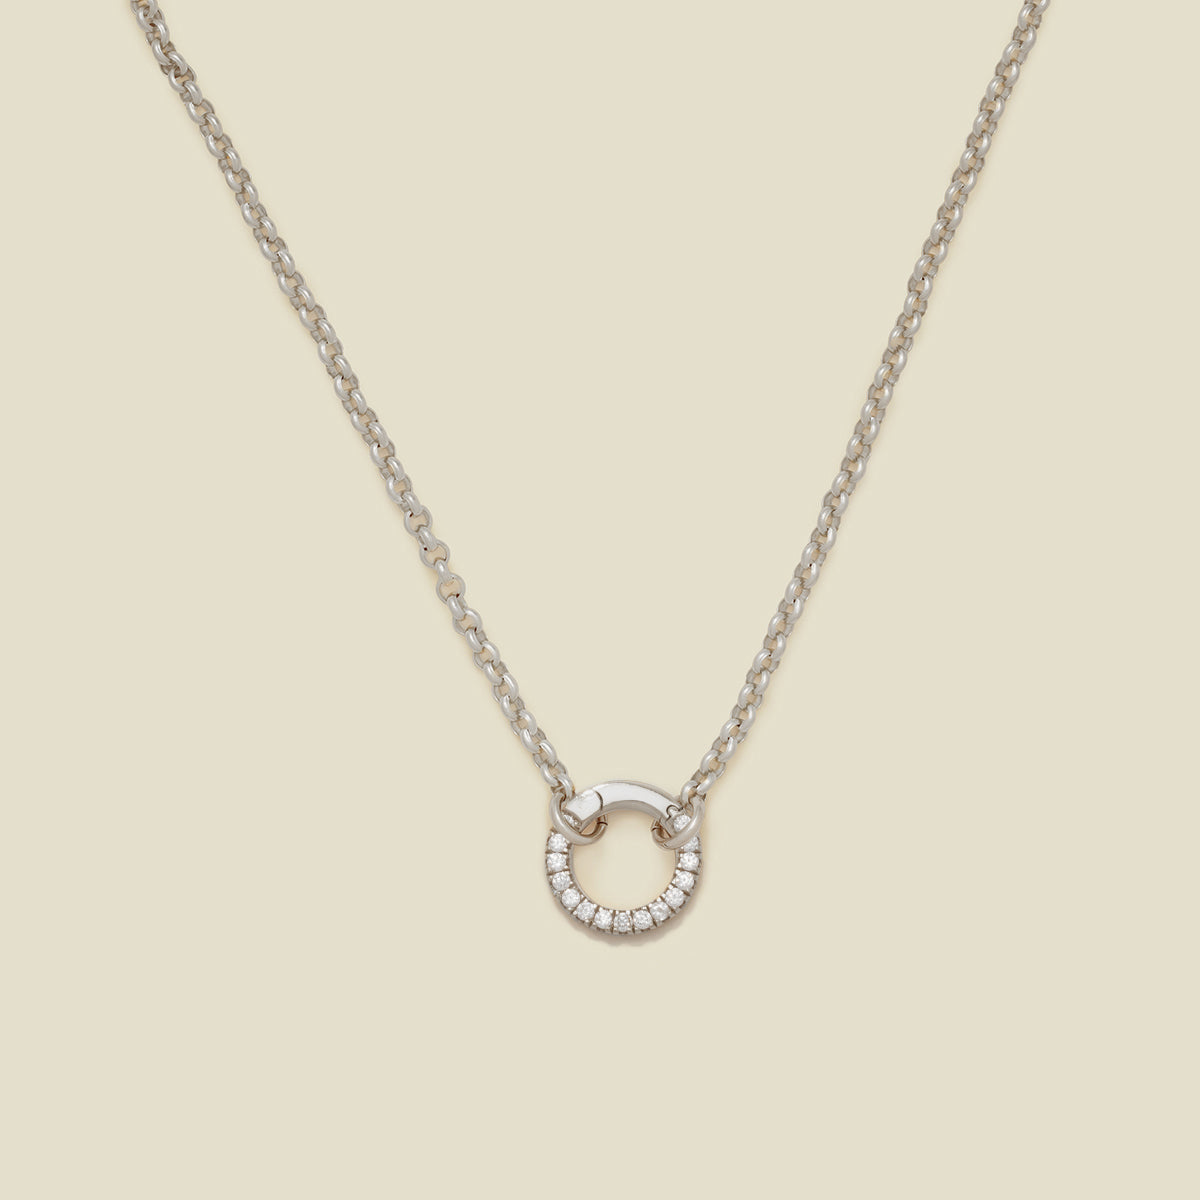 Rolo Charm Necklace Silver / With CZ Link Lock Necklace